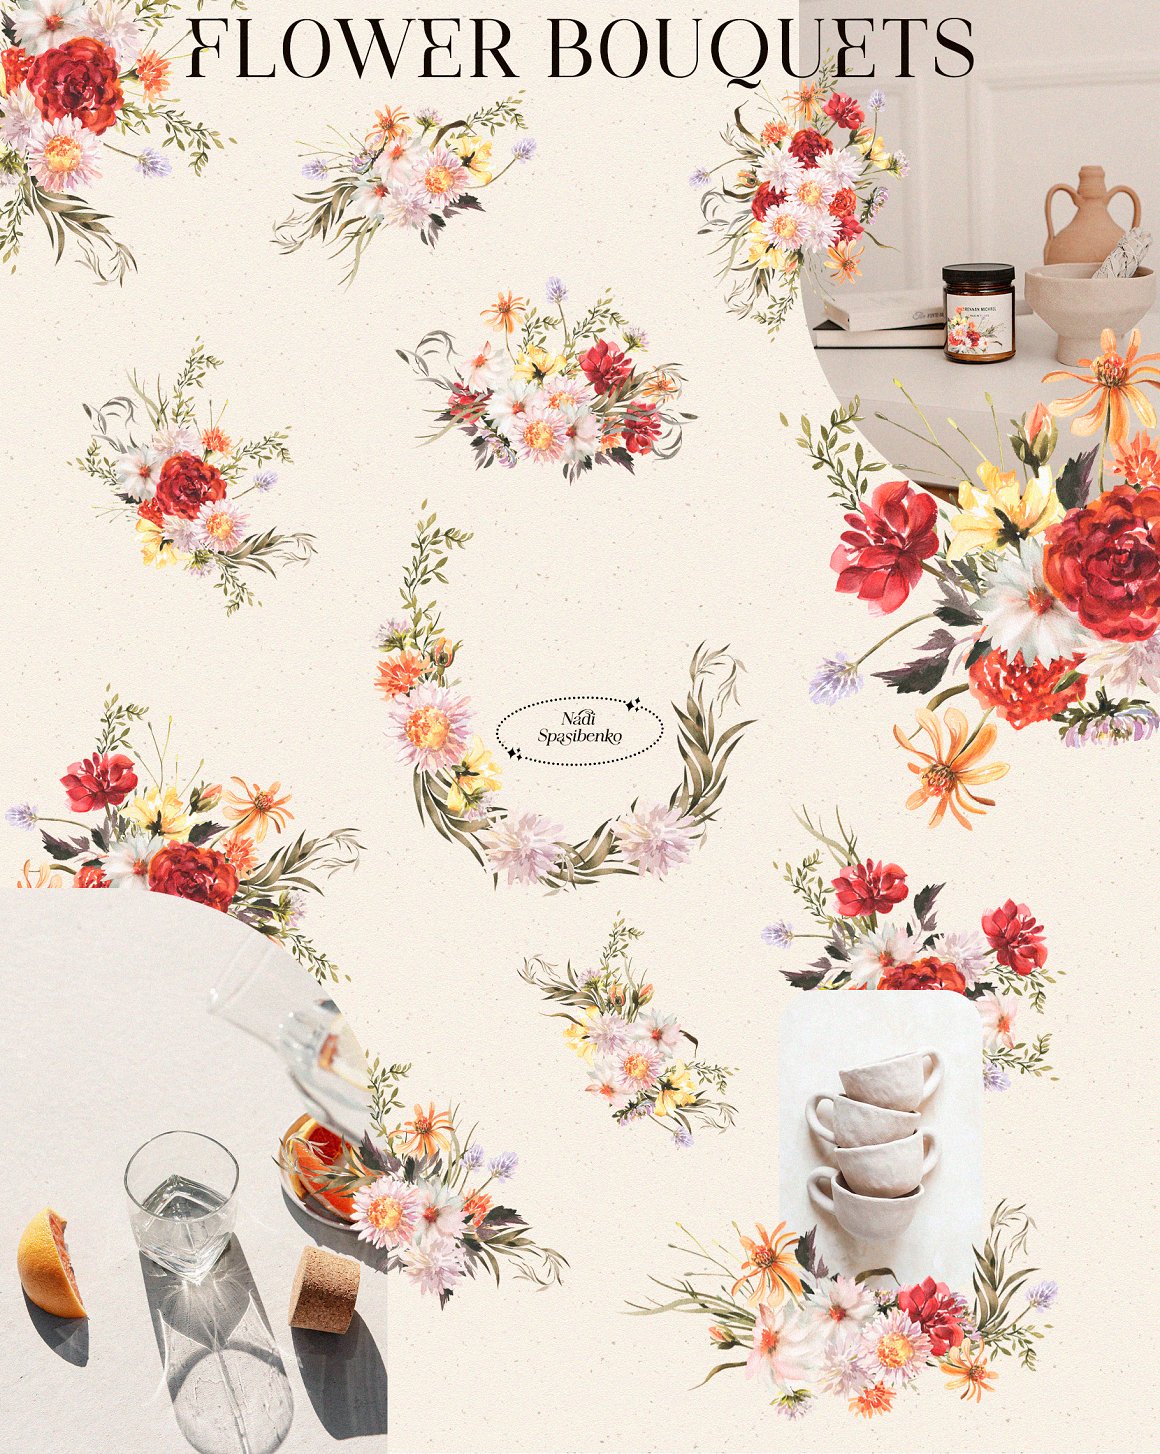 12 different watercolor flower bouquets on a beige background.